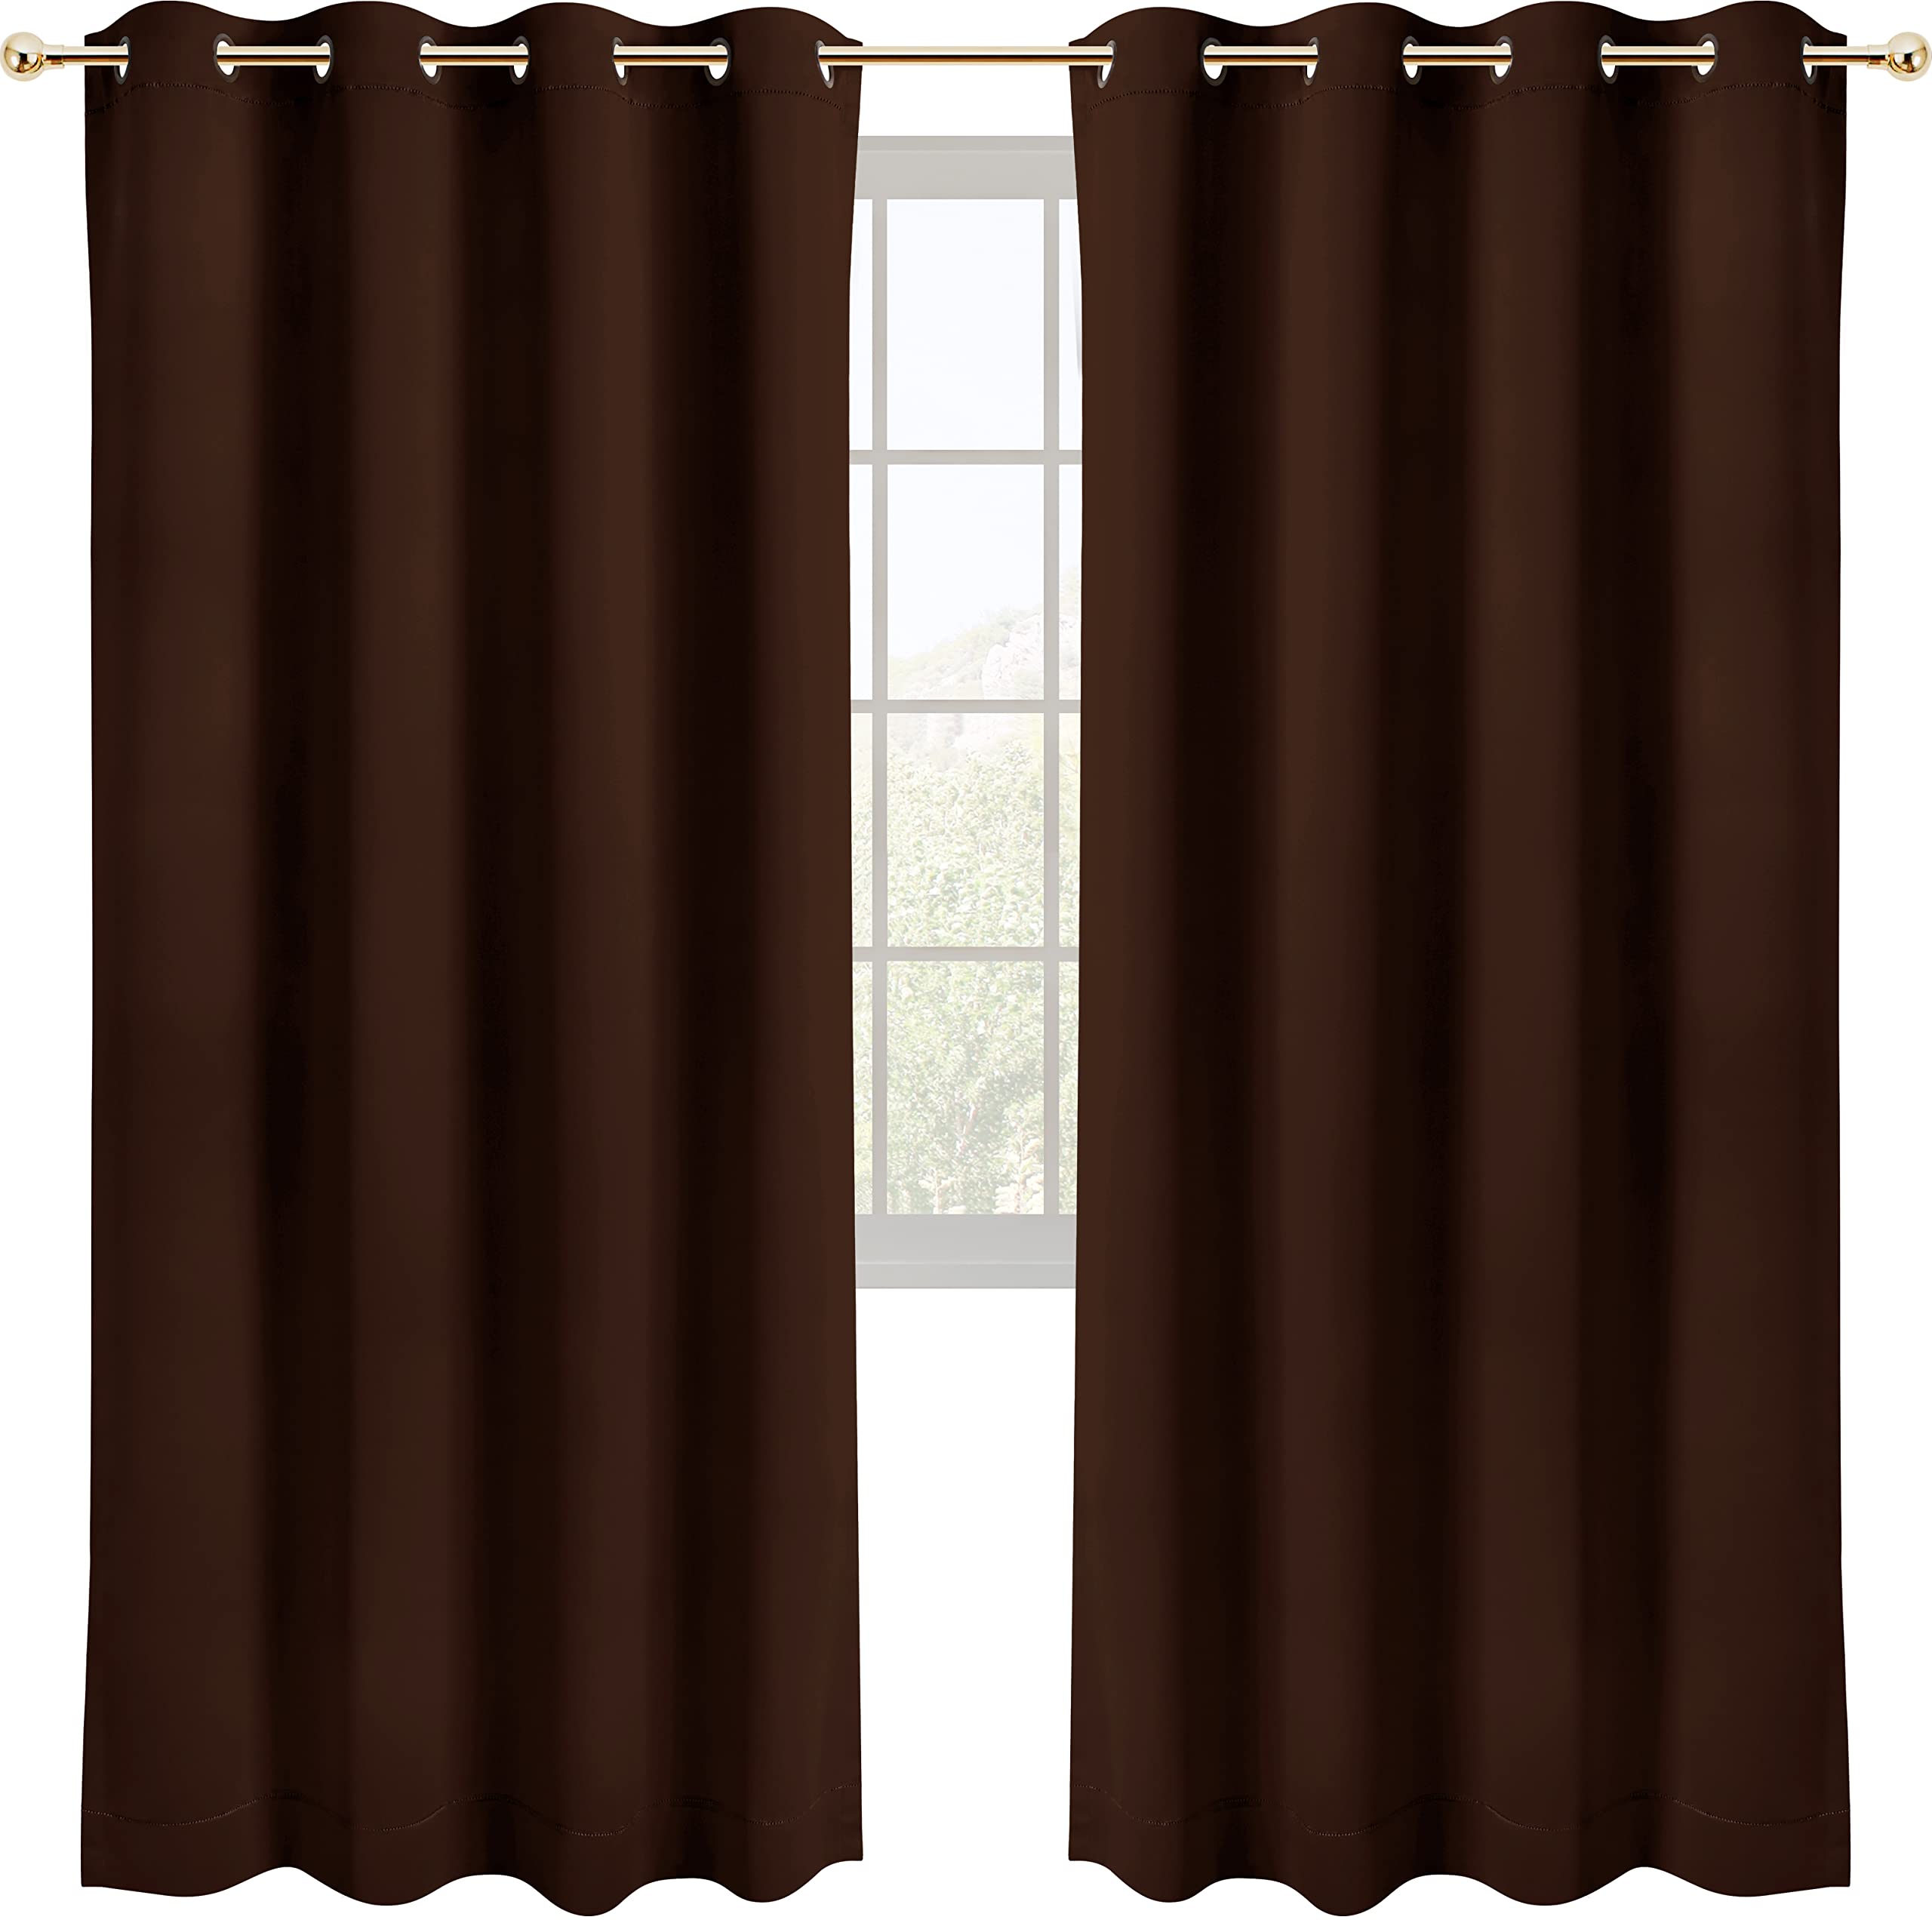 Book Cover Utopia Bedding Blackout Curtains for Bedroom, Grommet Window Curtains 84 Inch Length 2 Panels, Thermal Insulated Drapes for Living Room (Chocolate, 52W x 84L Inches) Chocolate 52W x 84L Inches